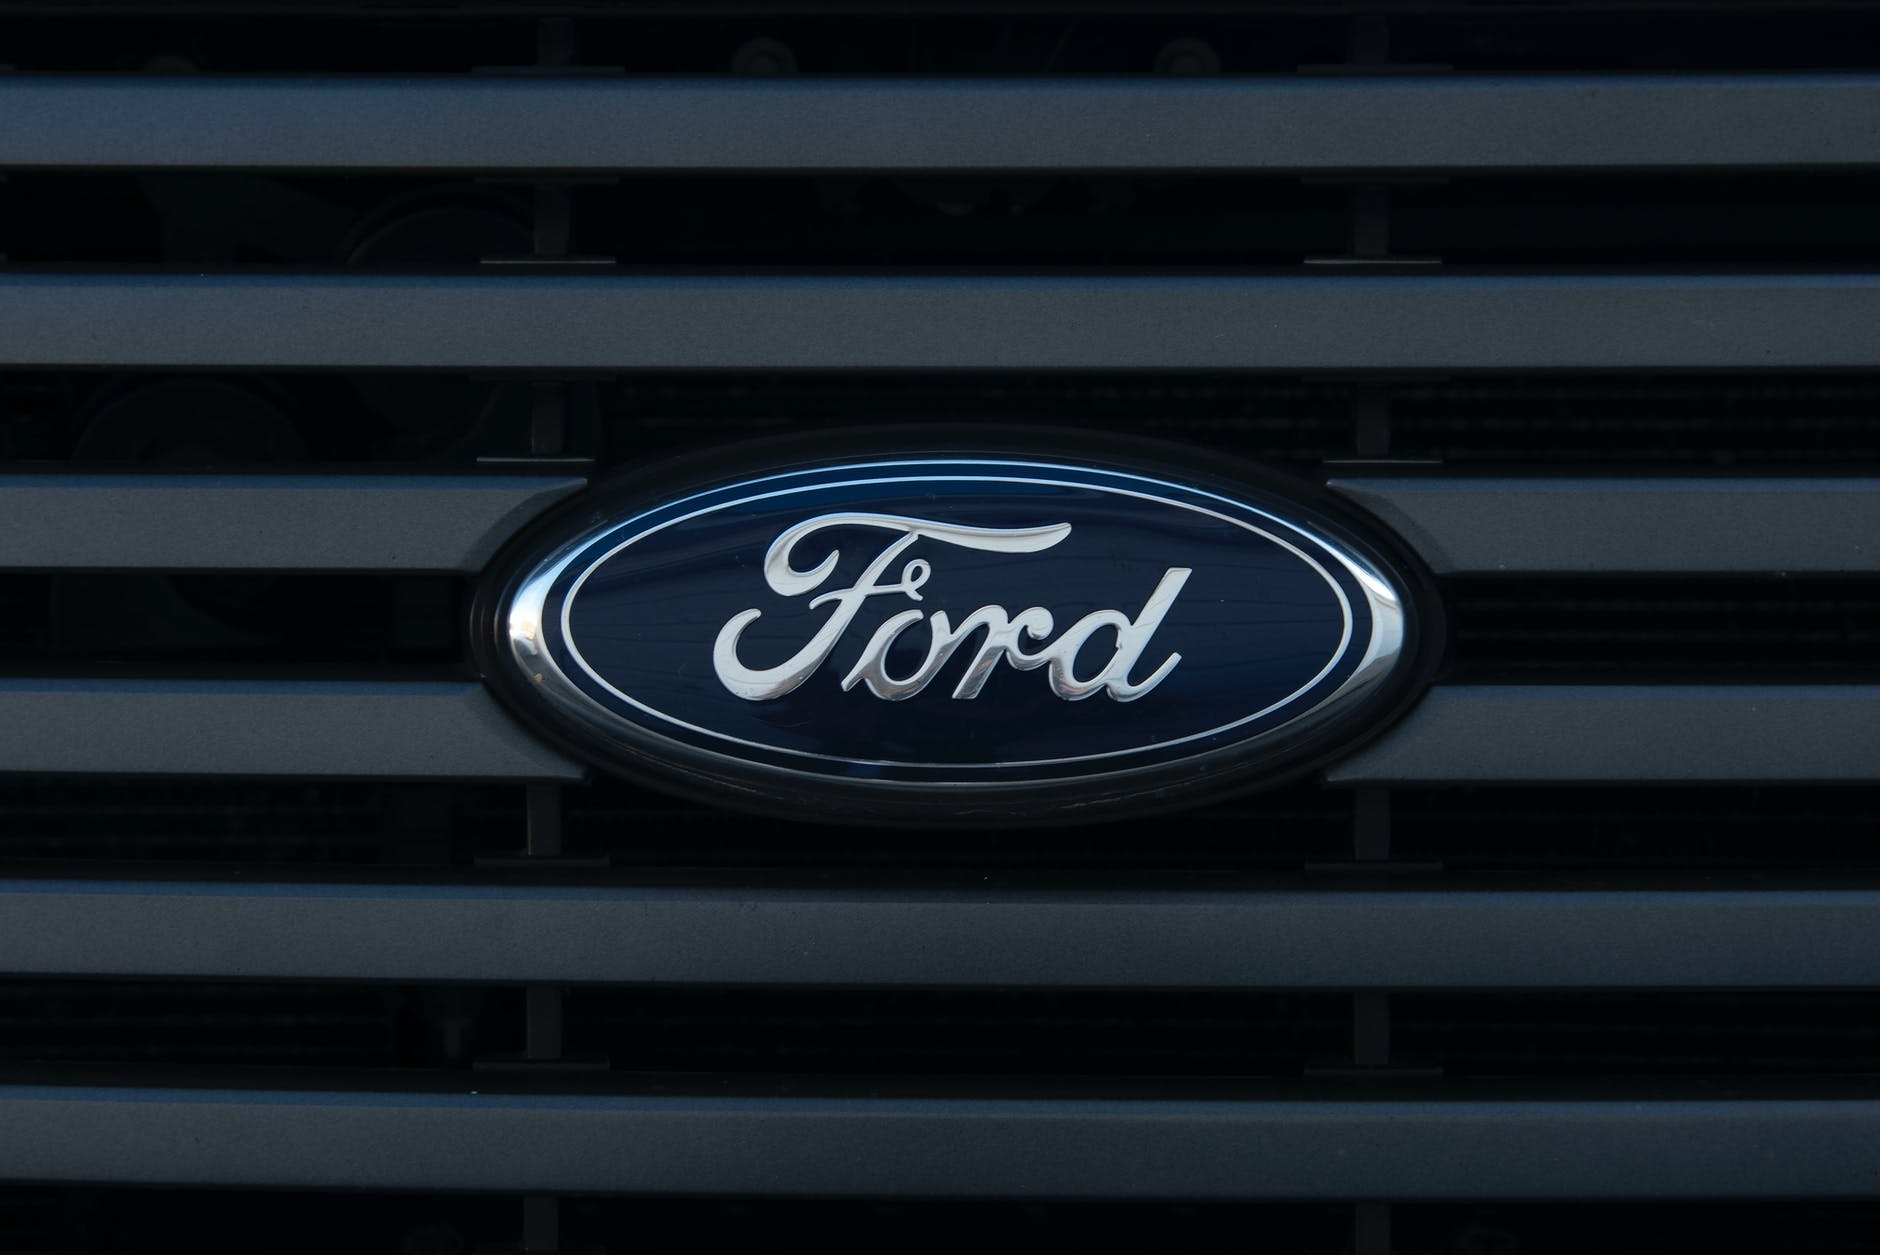 Ford Transit Custom Lease and its Essential Features